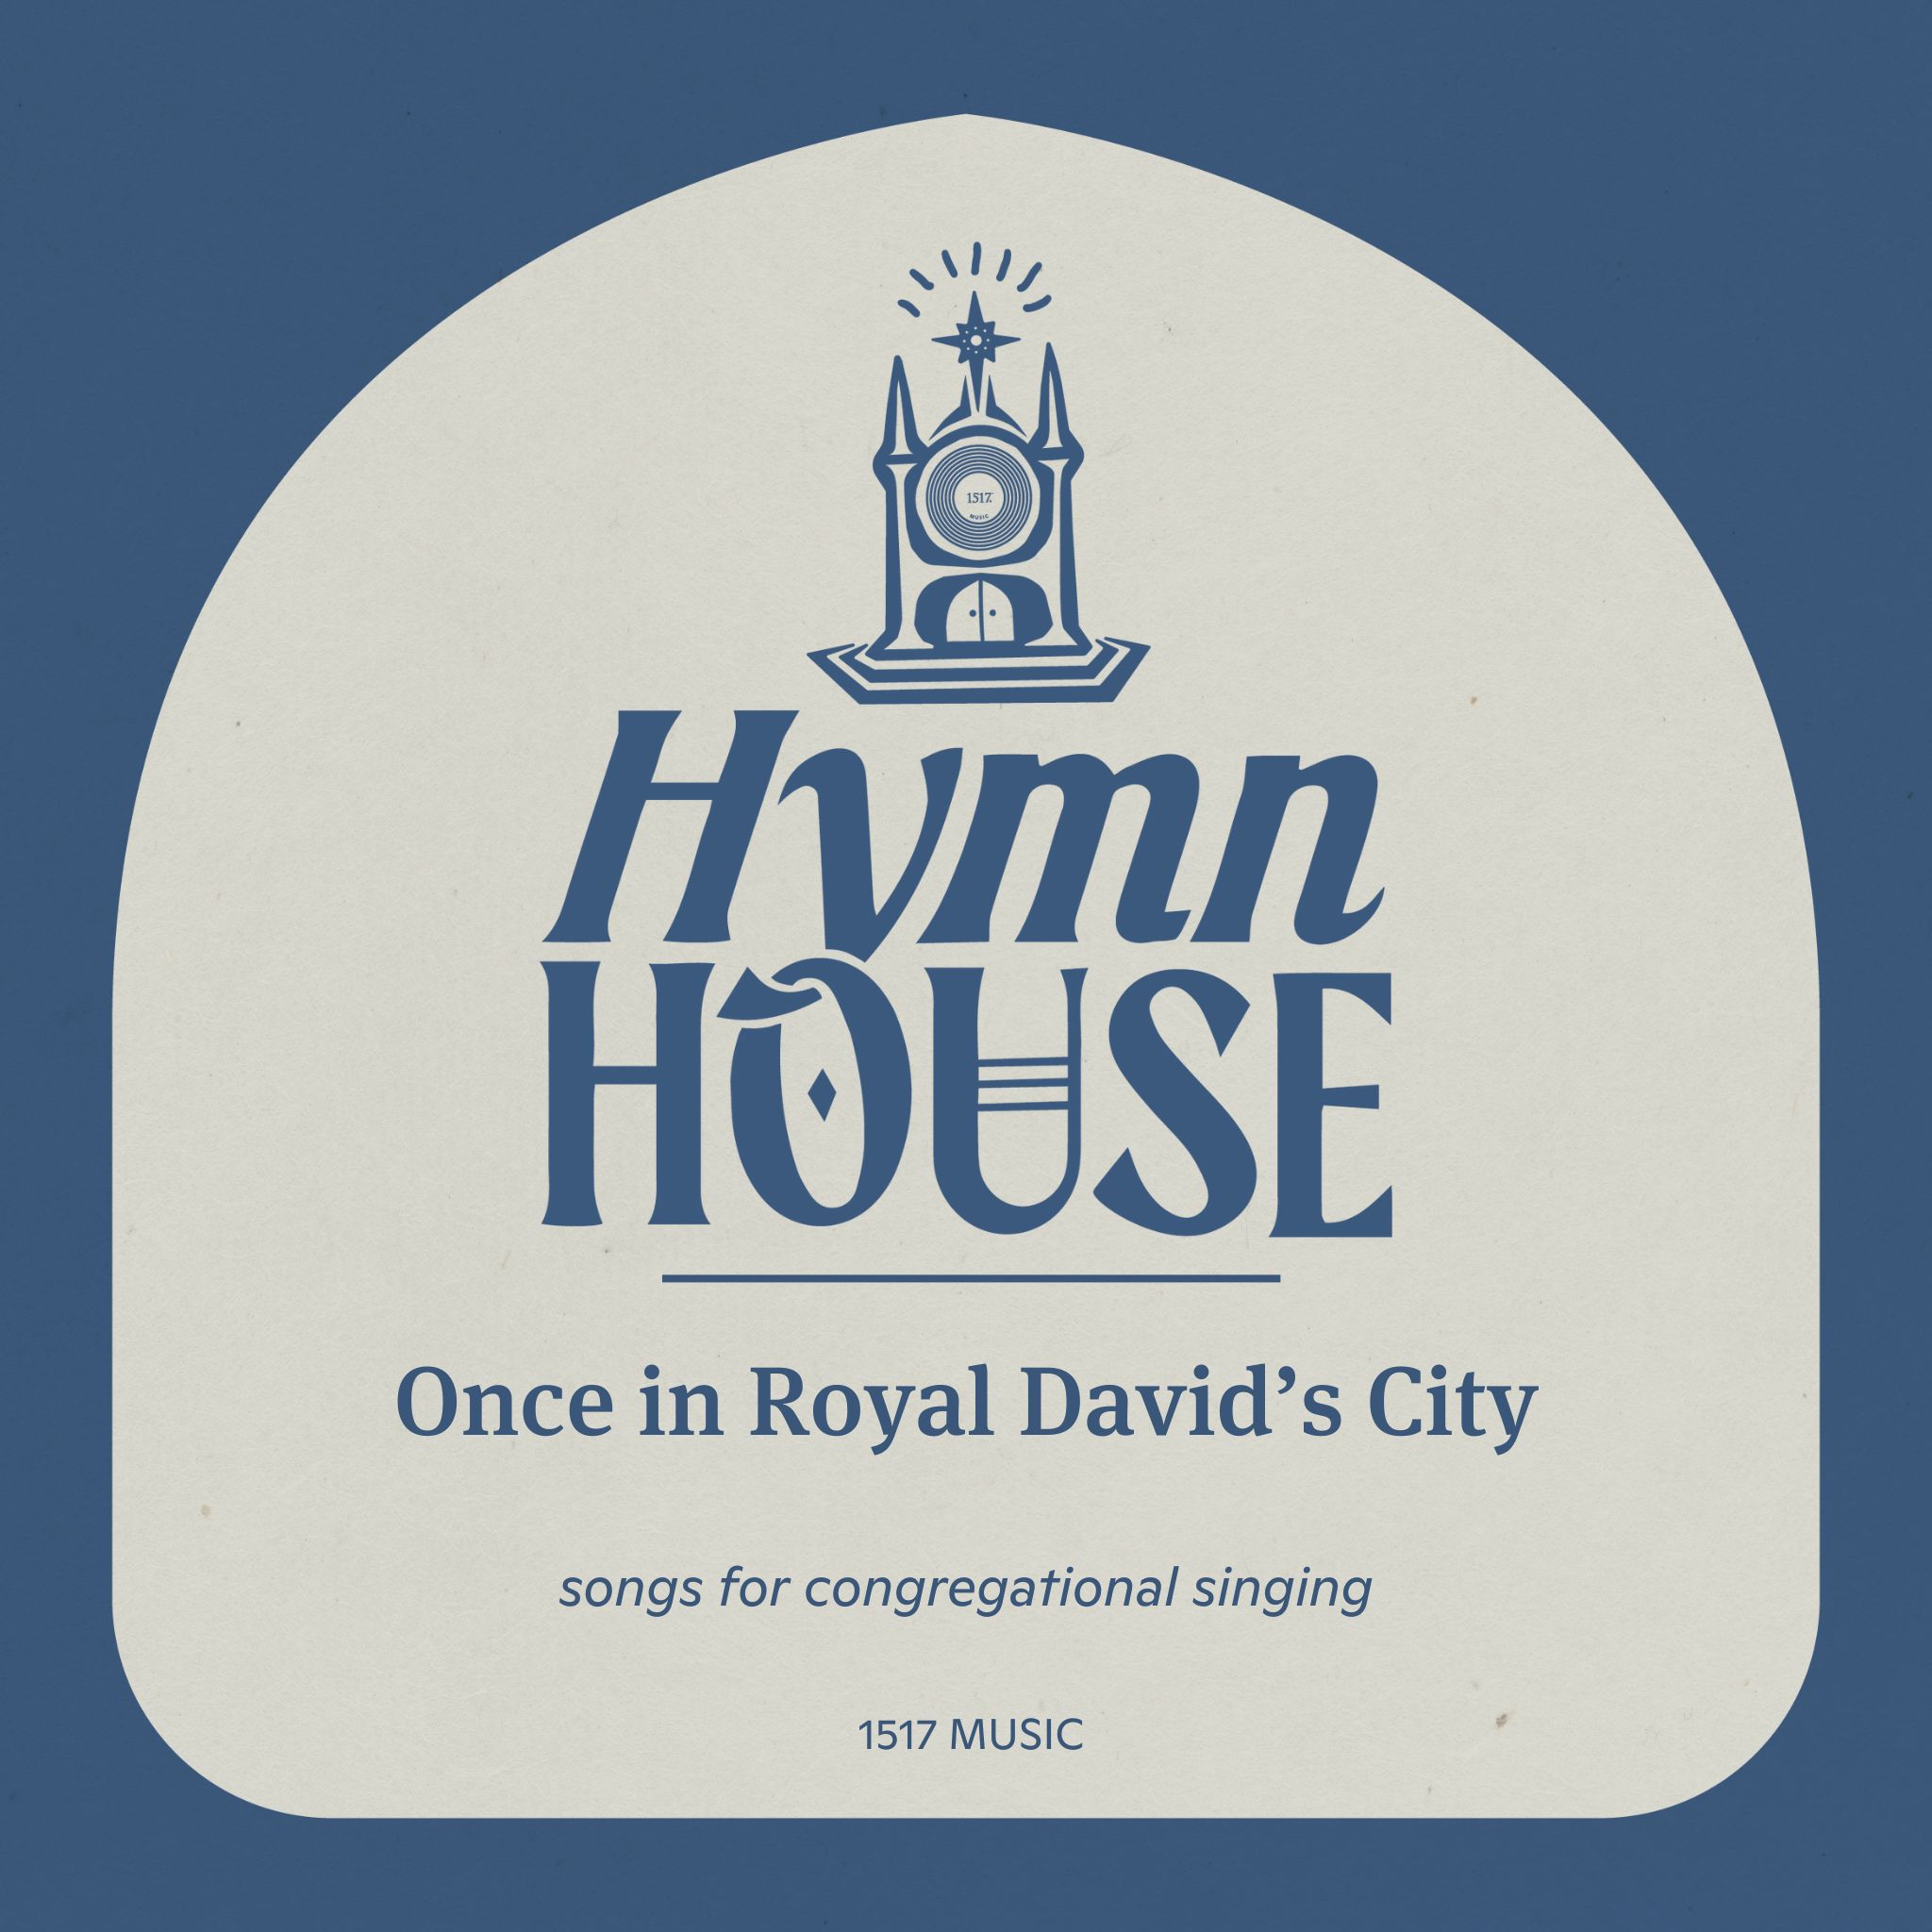 Once in Royal David's City (Hymn House)